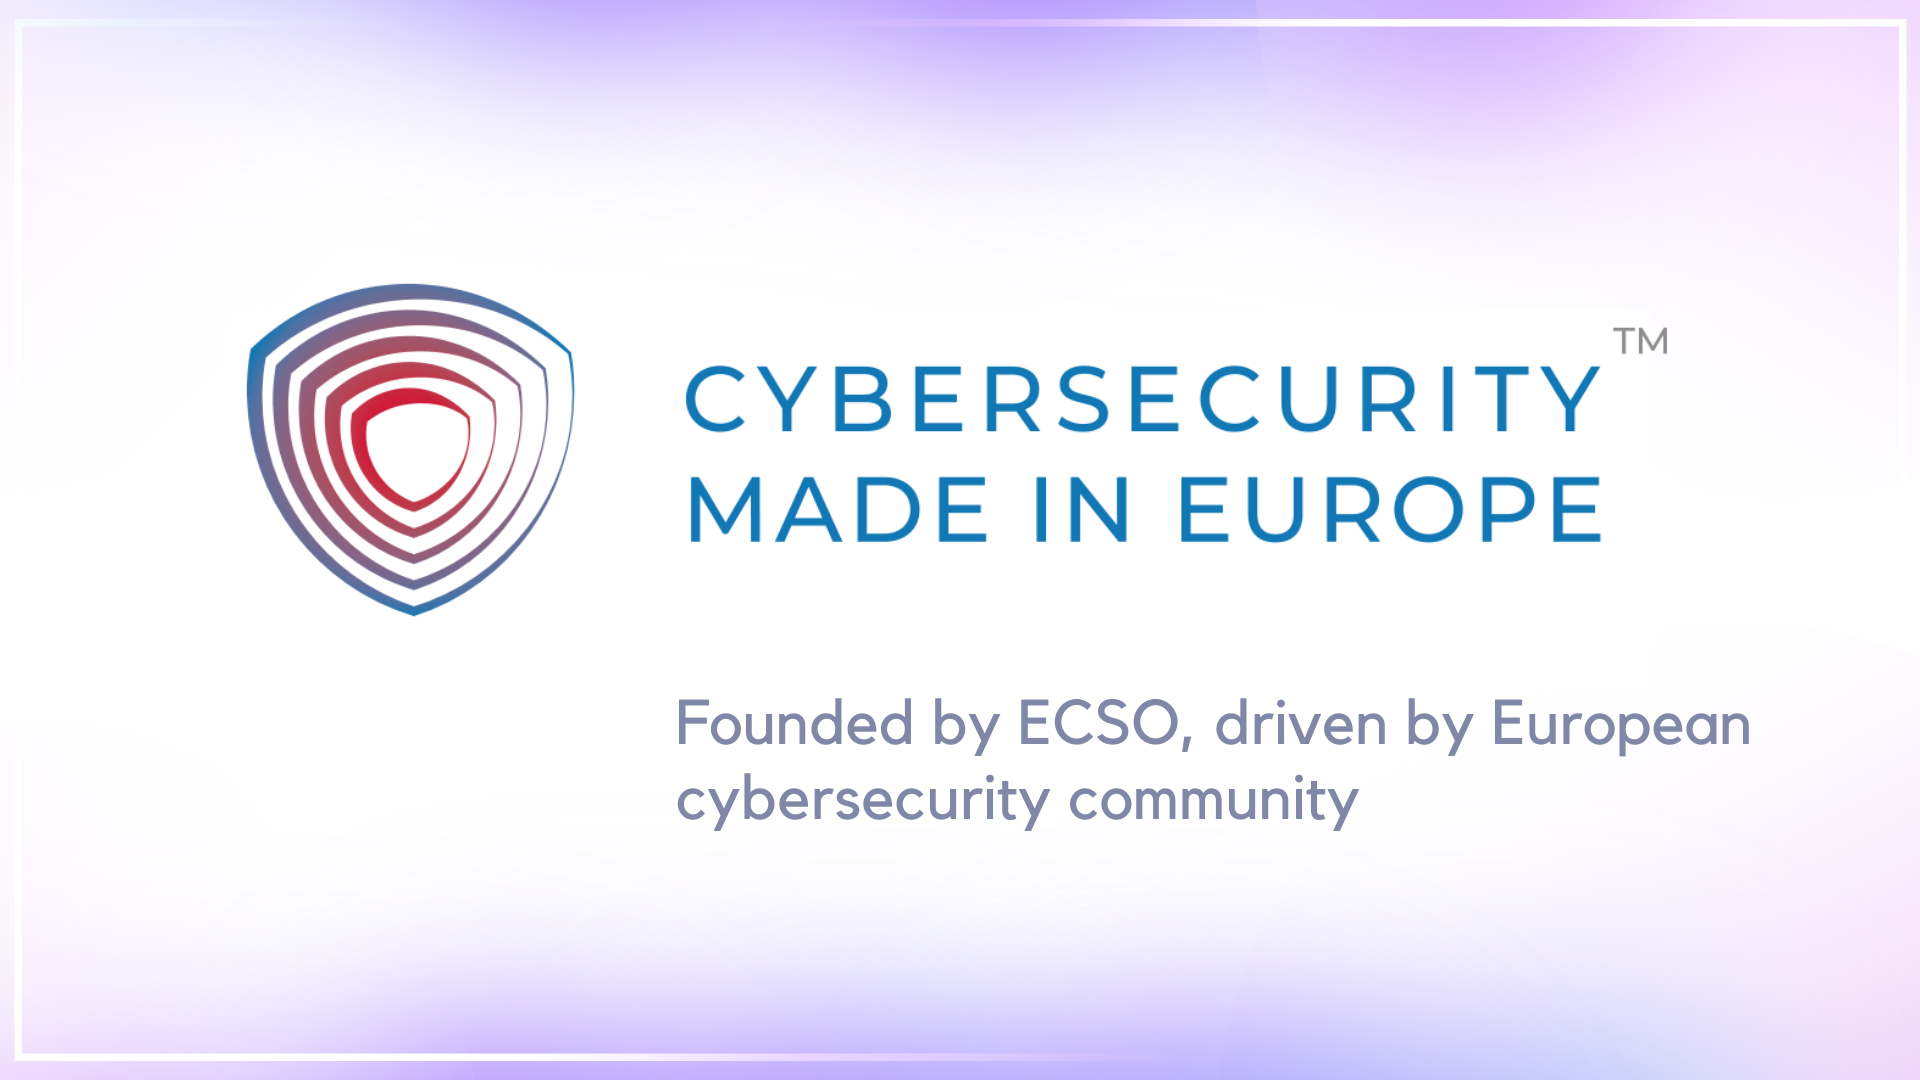 DIATEAM was awarded the ECSO label “Cybersecurity Made In Europe” issued by Pôle d’Excellence Cyber